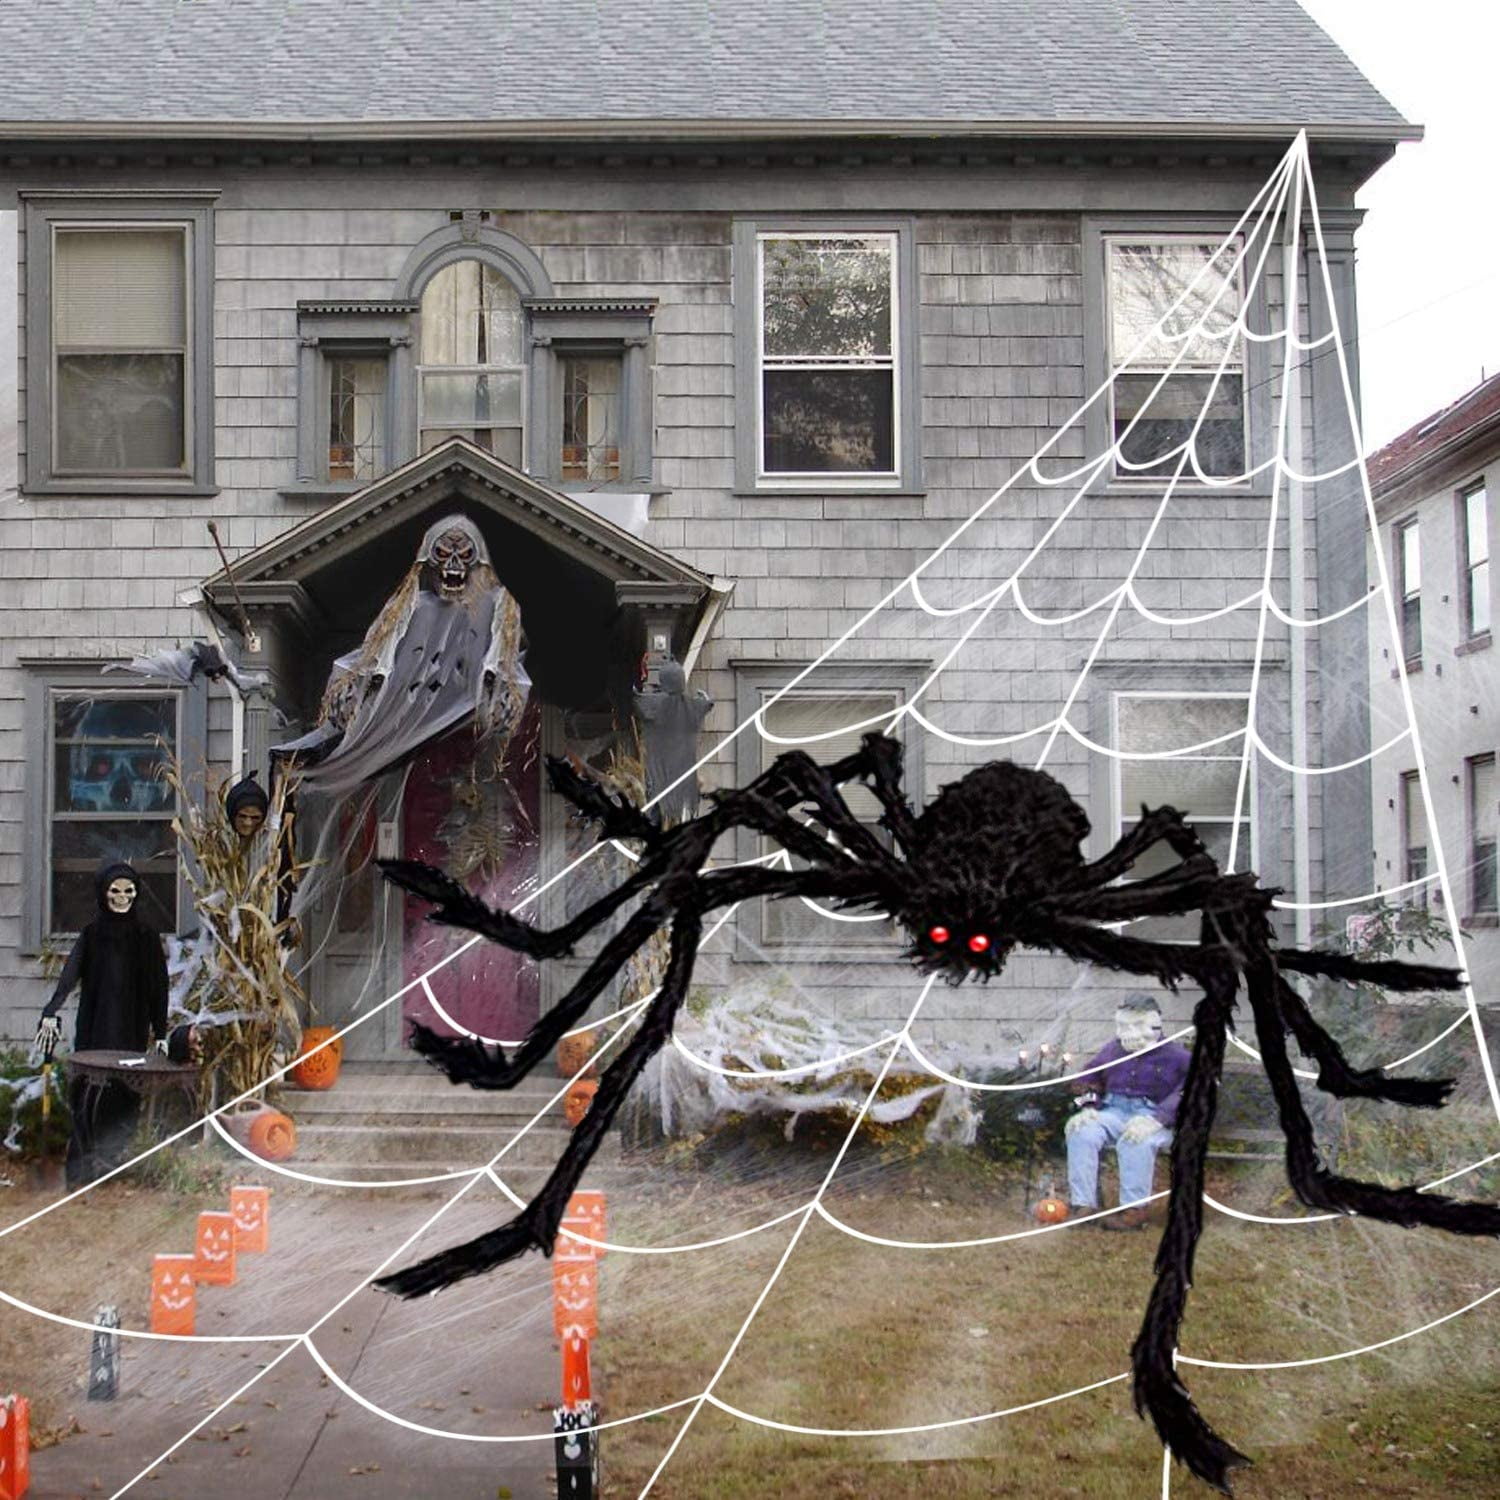 Cheerin Outdoor Halloween Decorations - Scary Spider Decorations ...